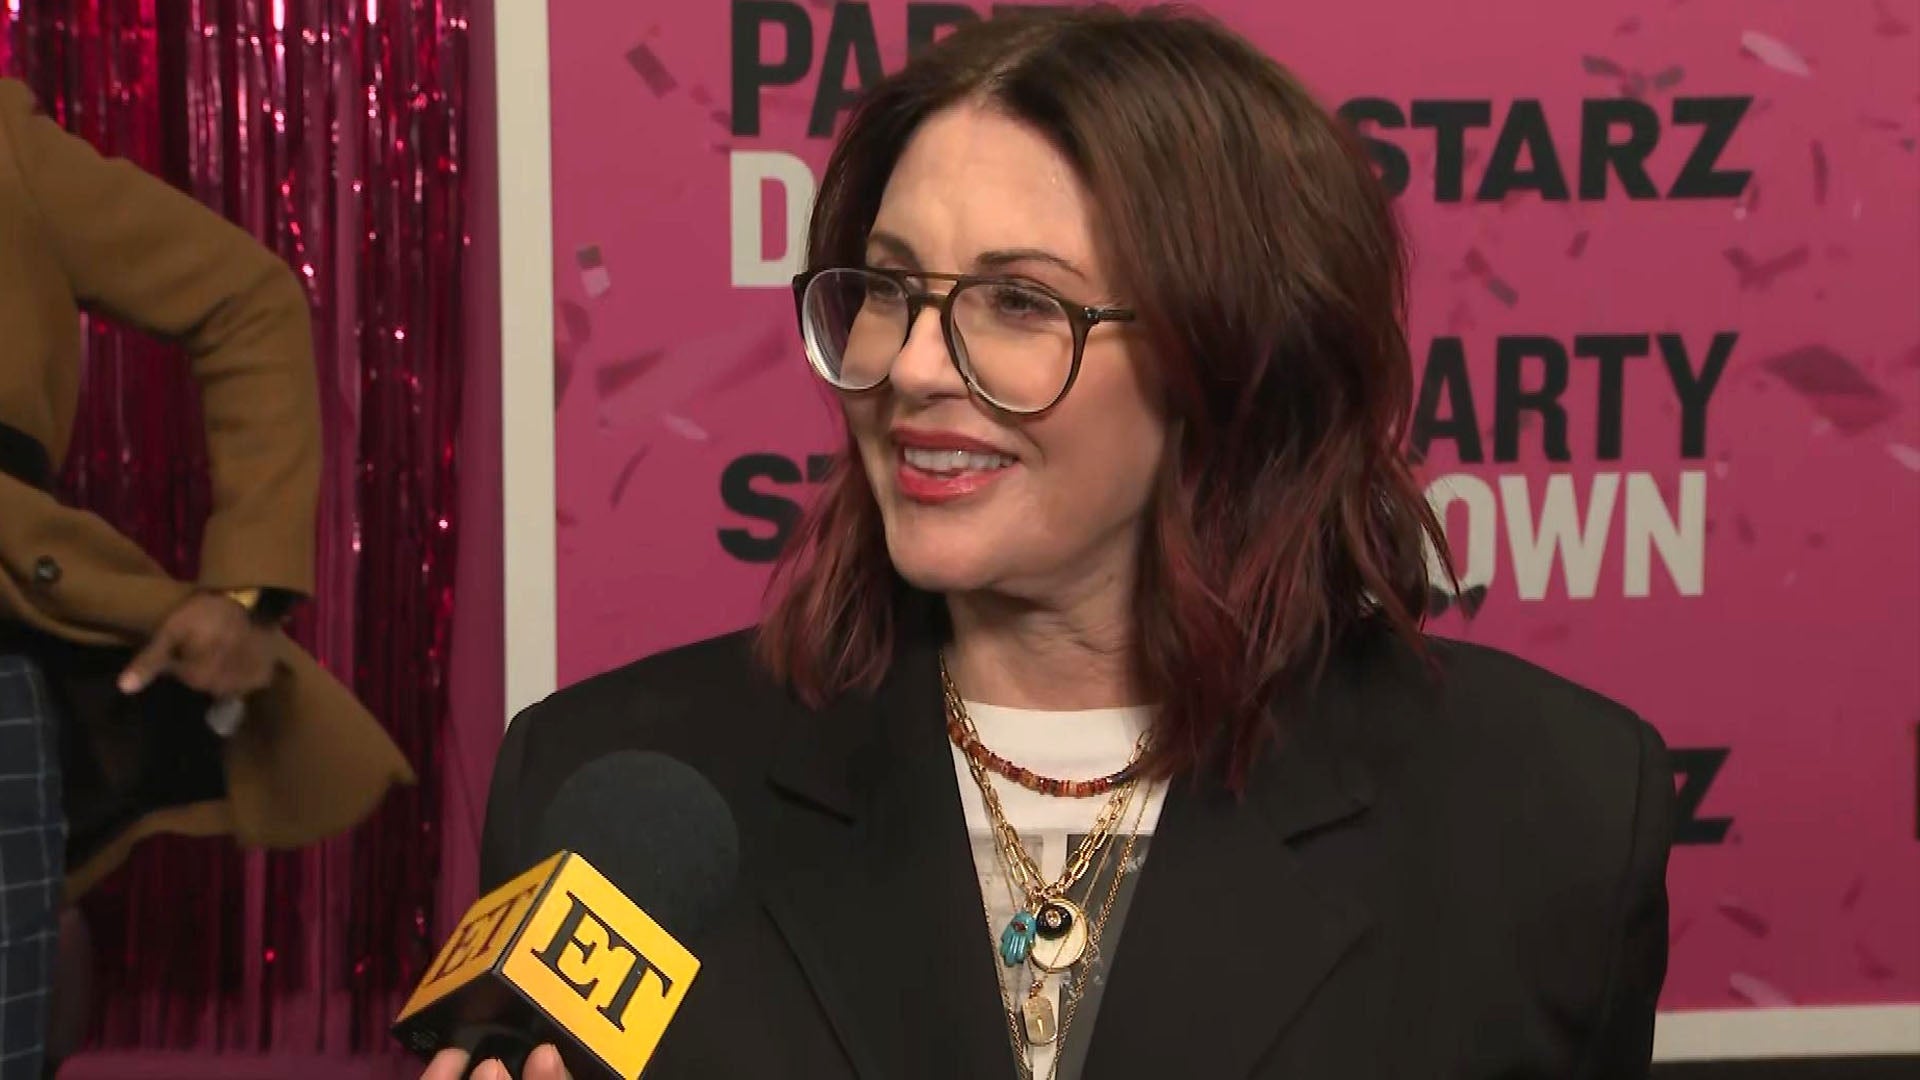 Megan Mullally Reveals She and Husband Nick Offerman are Joining 'The Umbrella Academy' Season 4